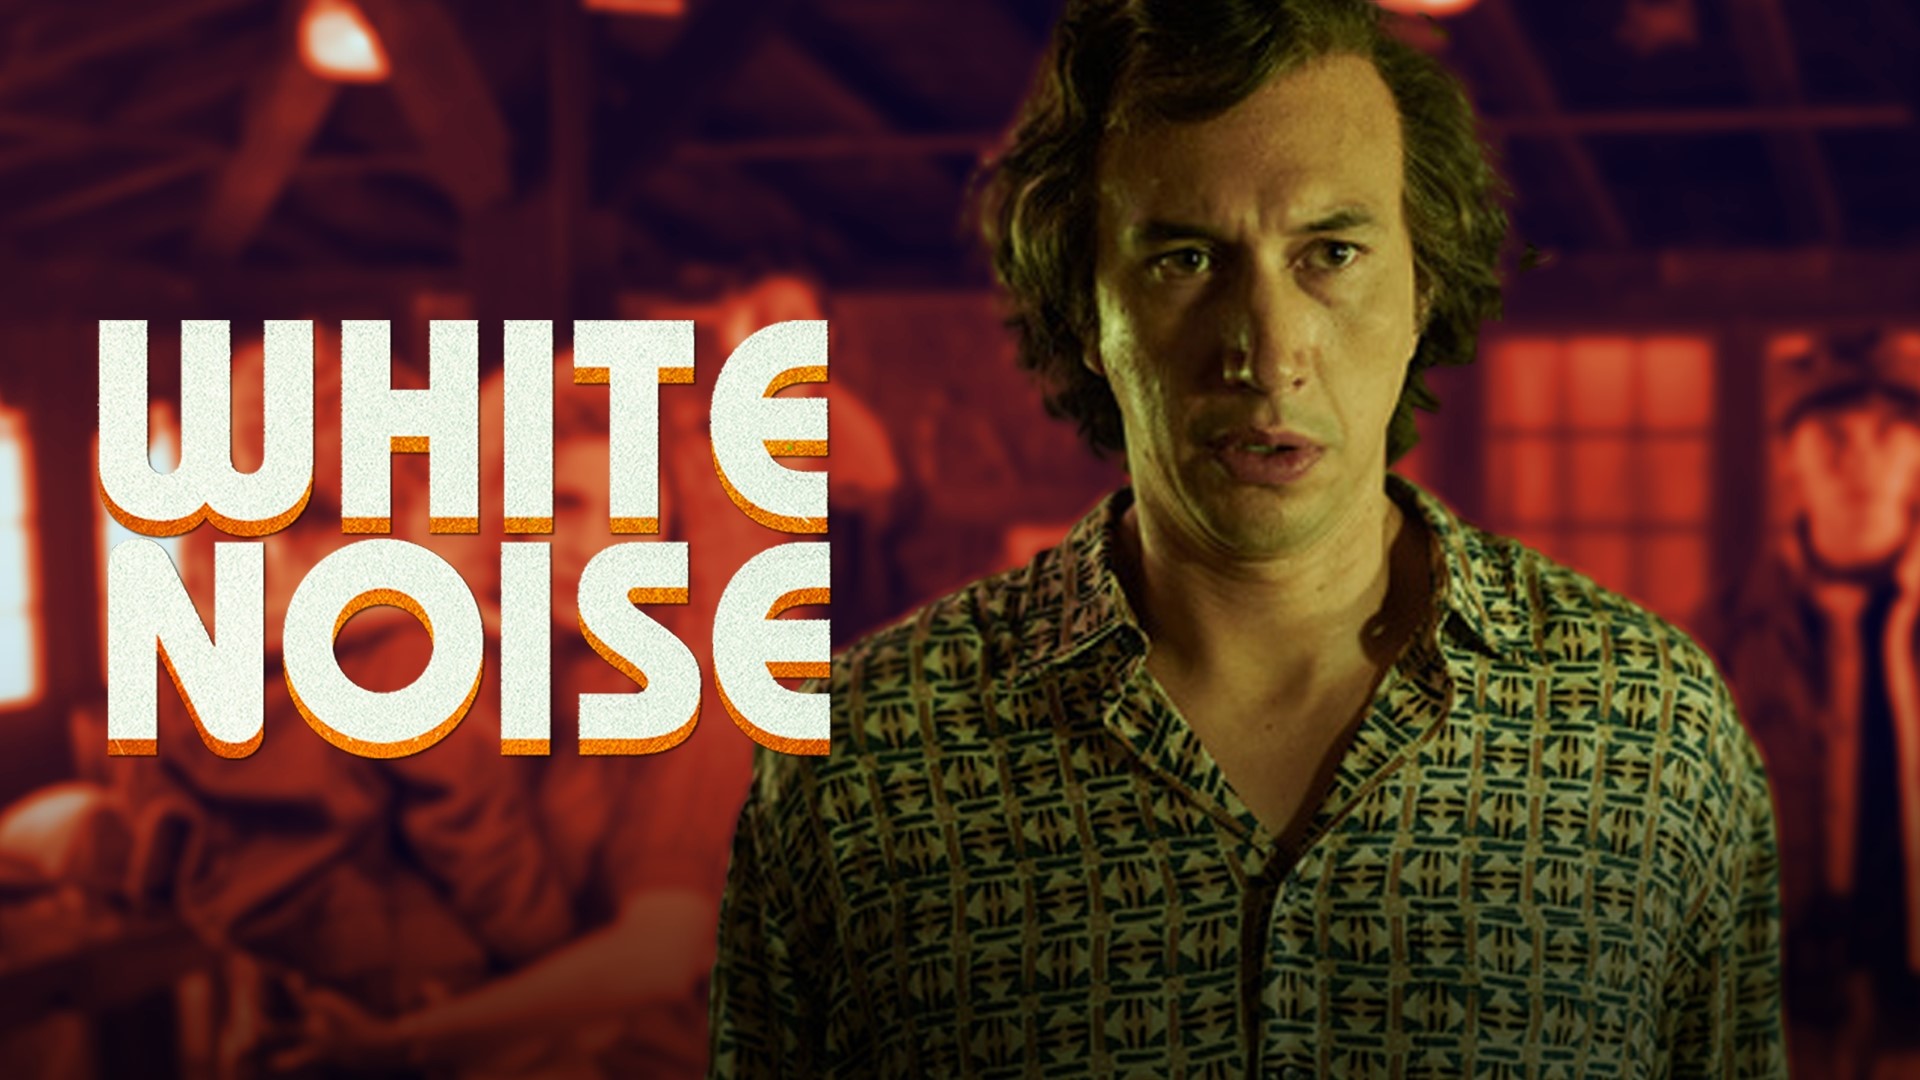 Adam Driver takes another whirl in the meta-film world, but this time White Noise takes an absurdist look at consumerism in the 80s and the "ideal" American life.